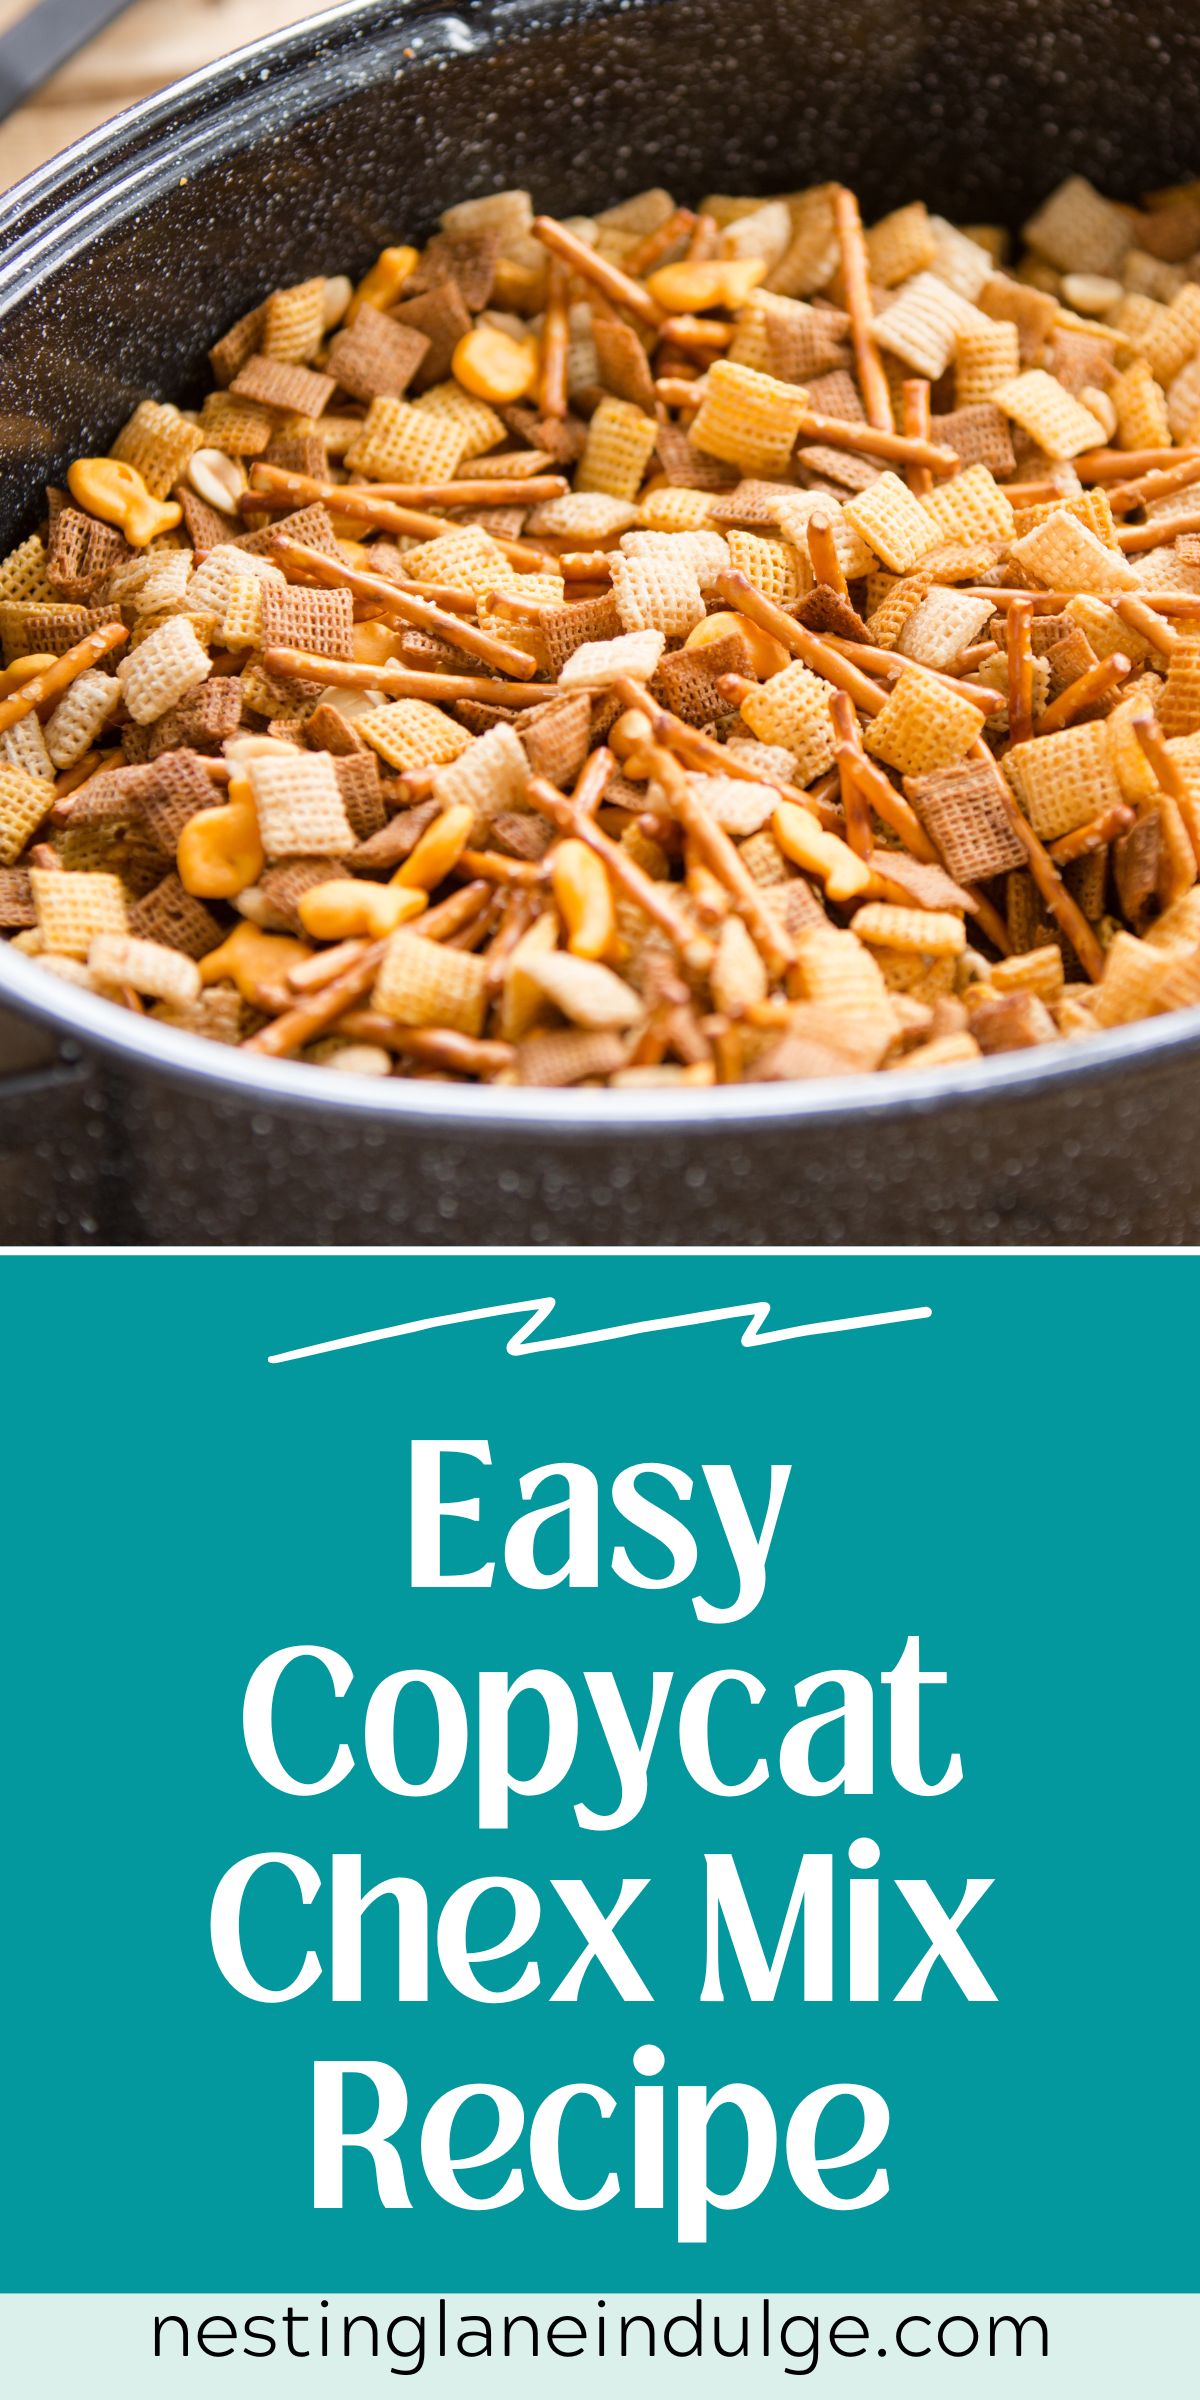 Graphic for Pinterest of Easy Copycat Chex Mix Recipe.